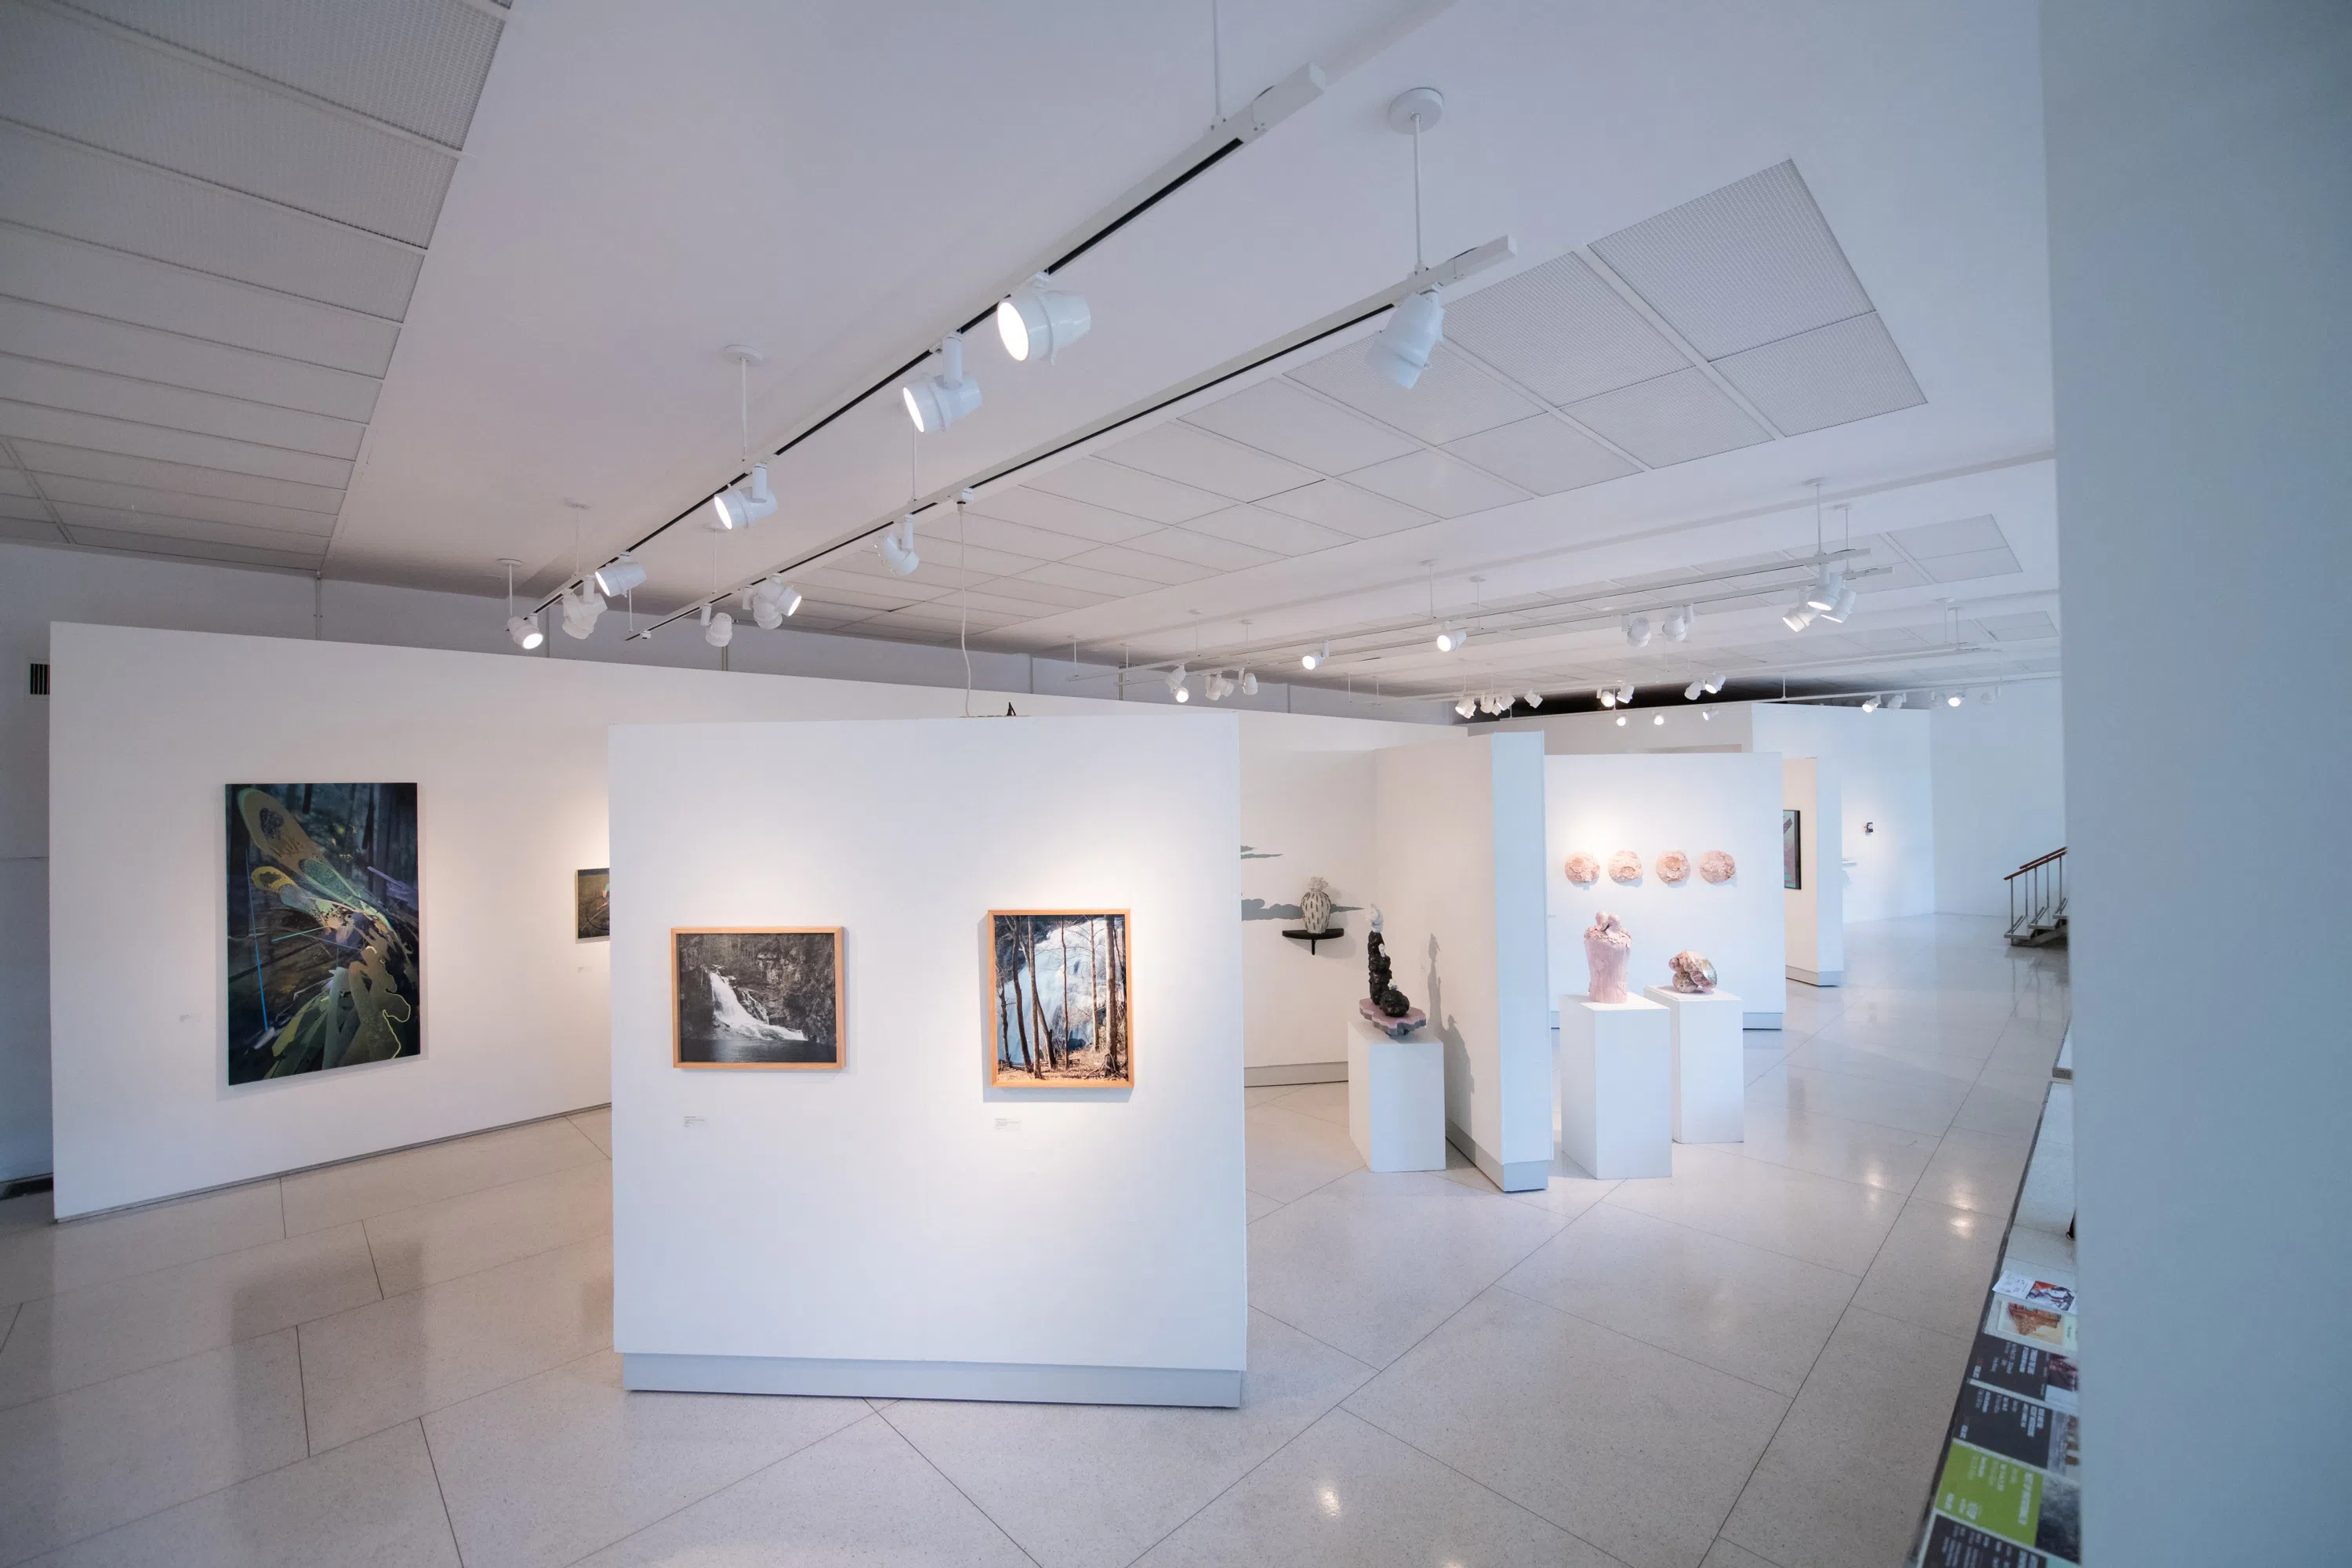 The Lee Hall art gallery hosts a visiting artist exhibit.